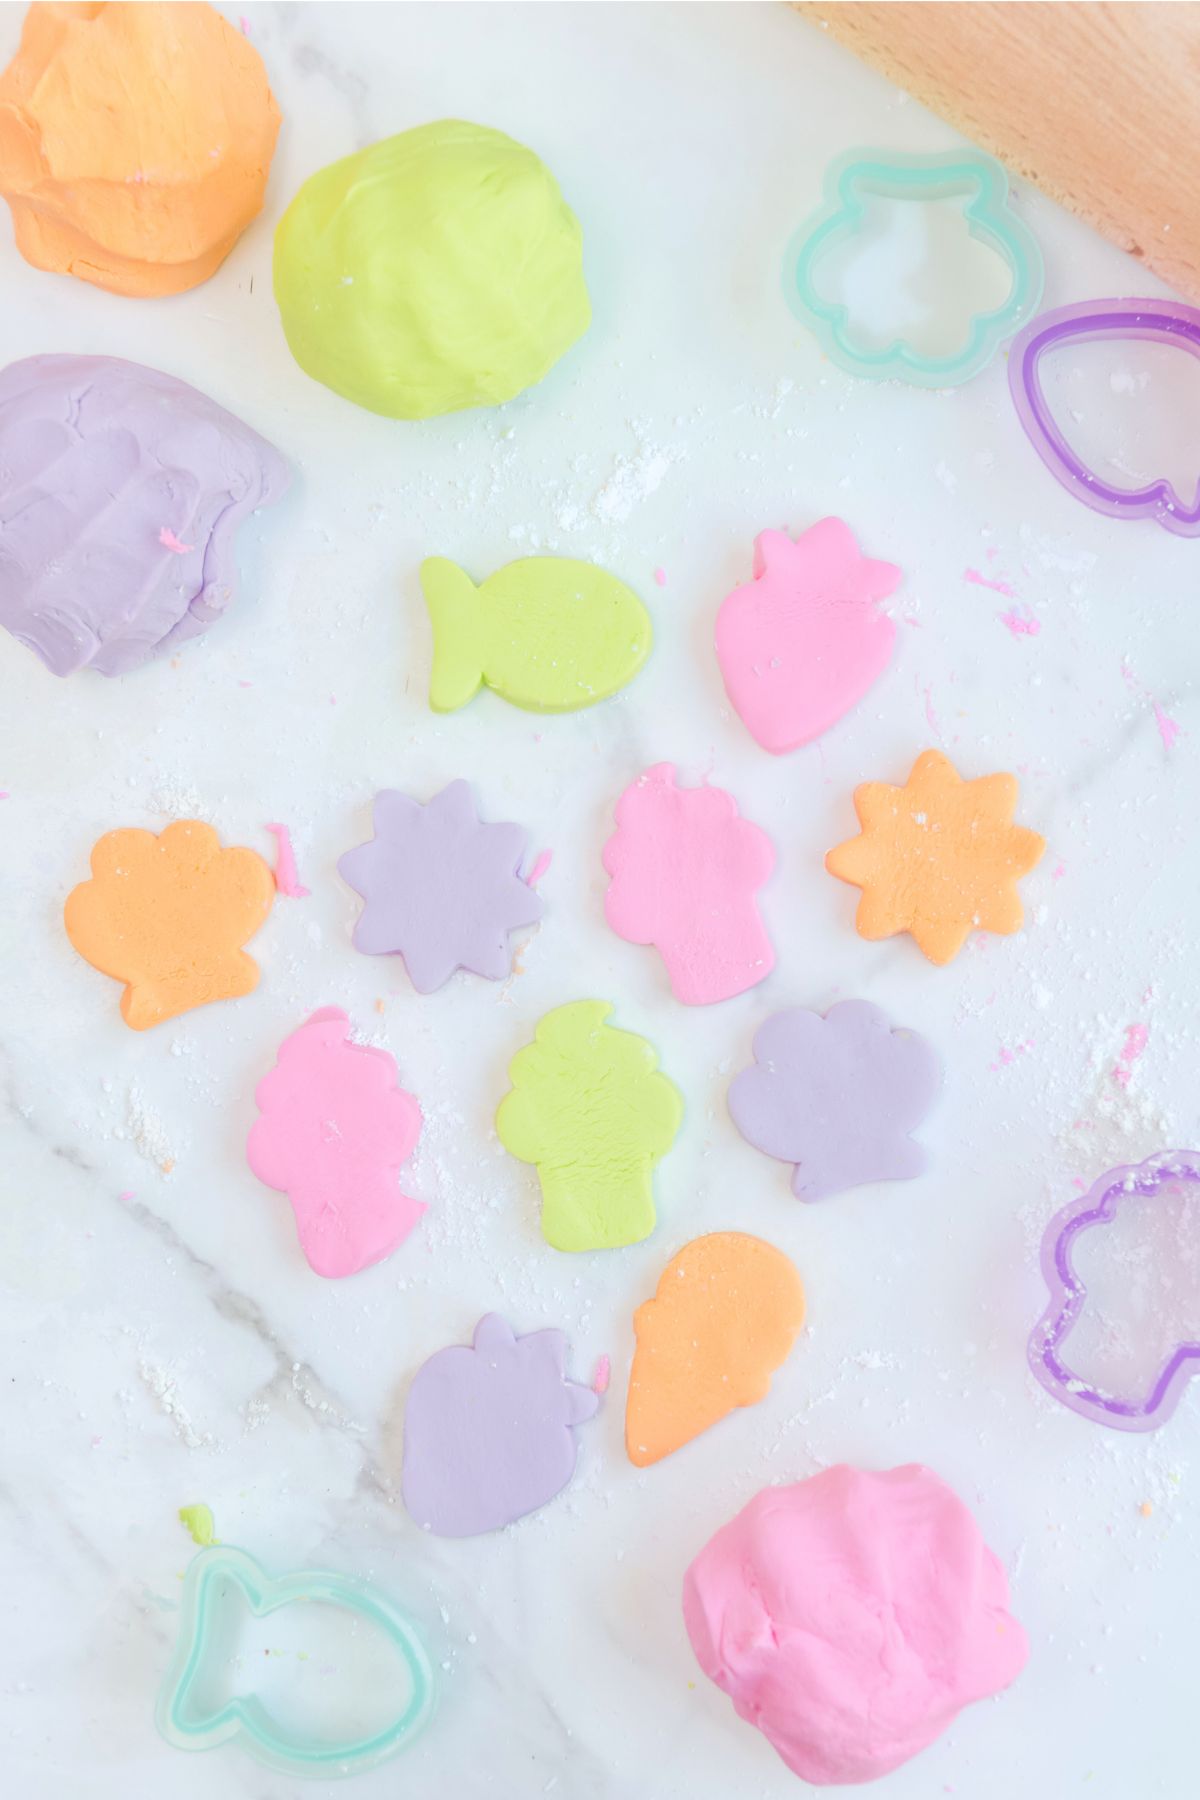 colorful playdough cut into different shapes.